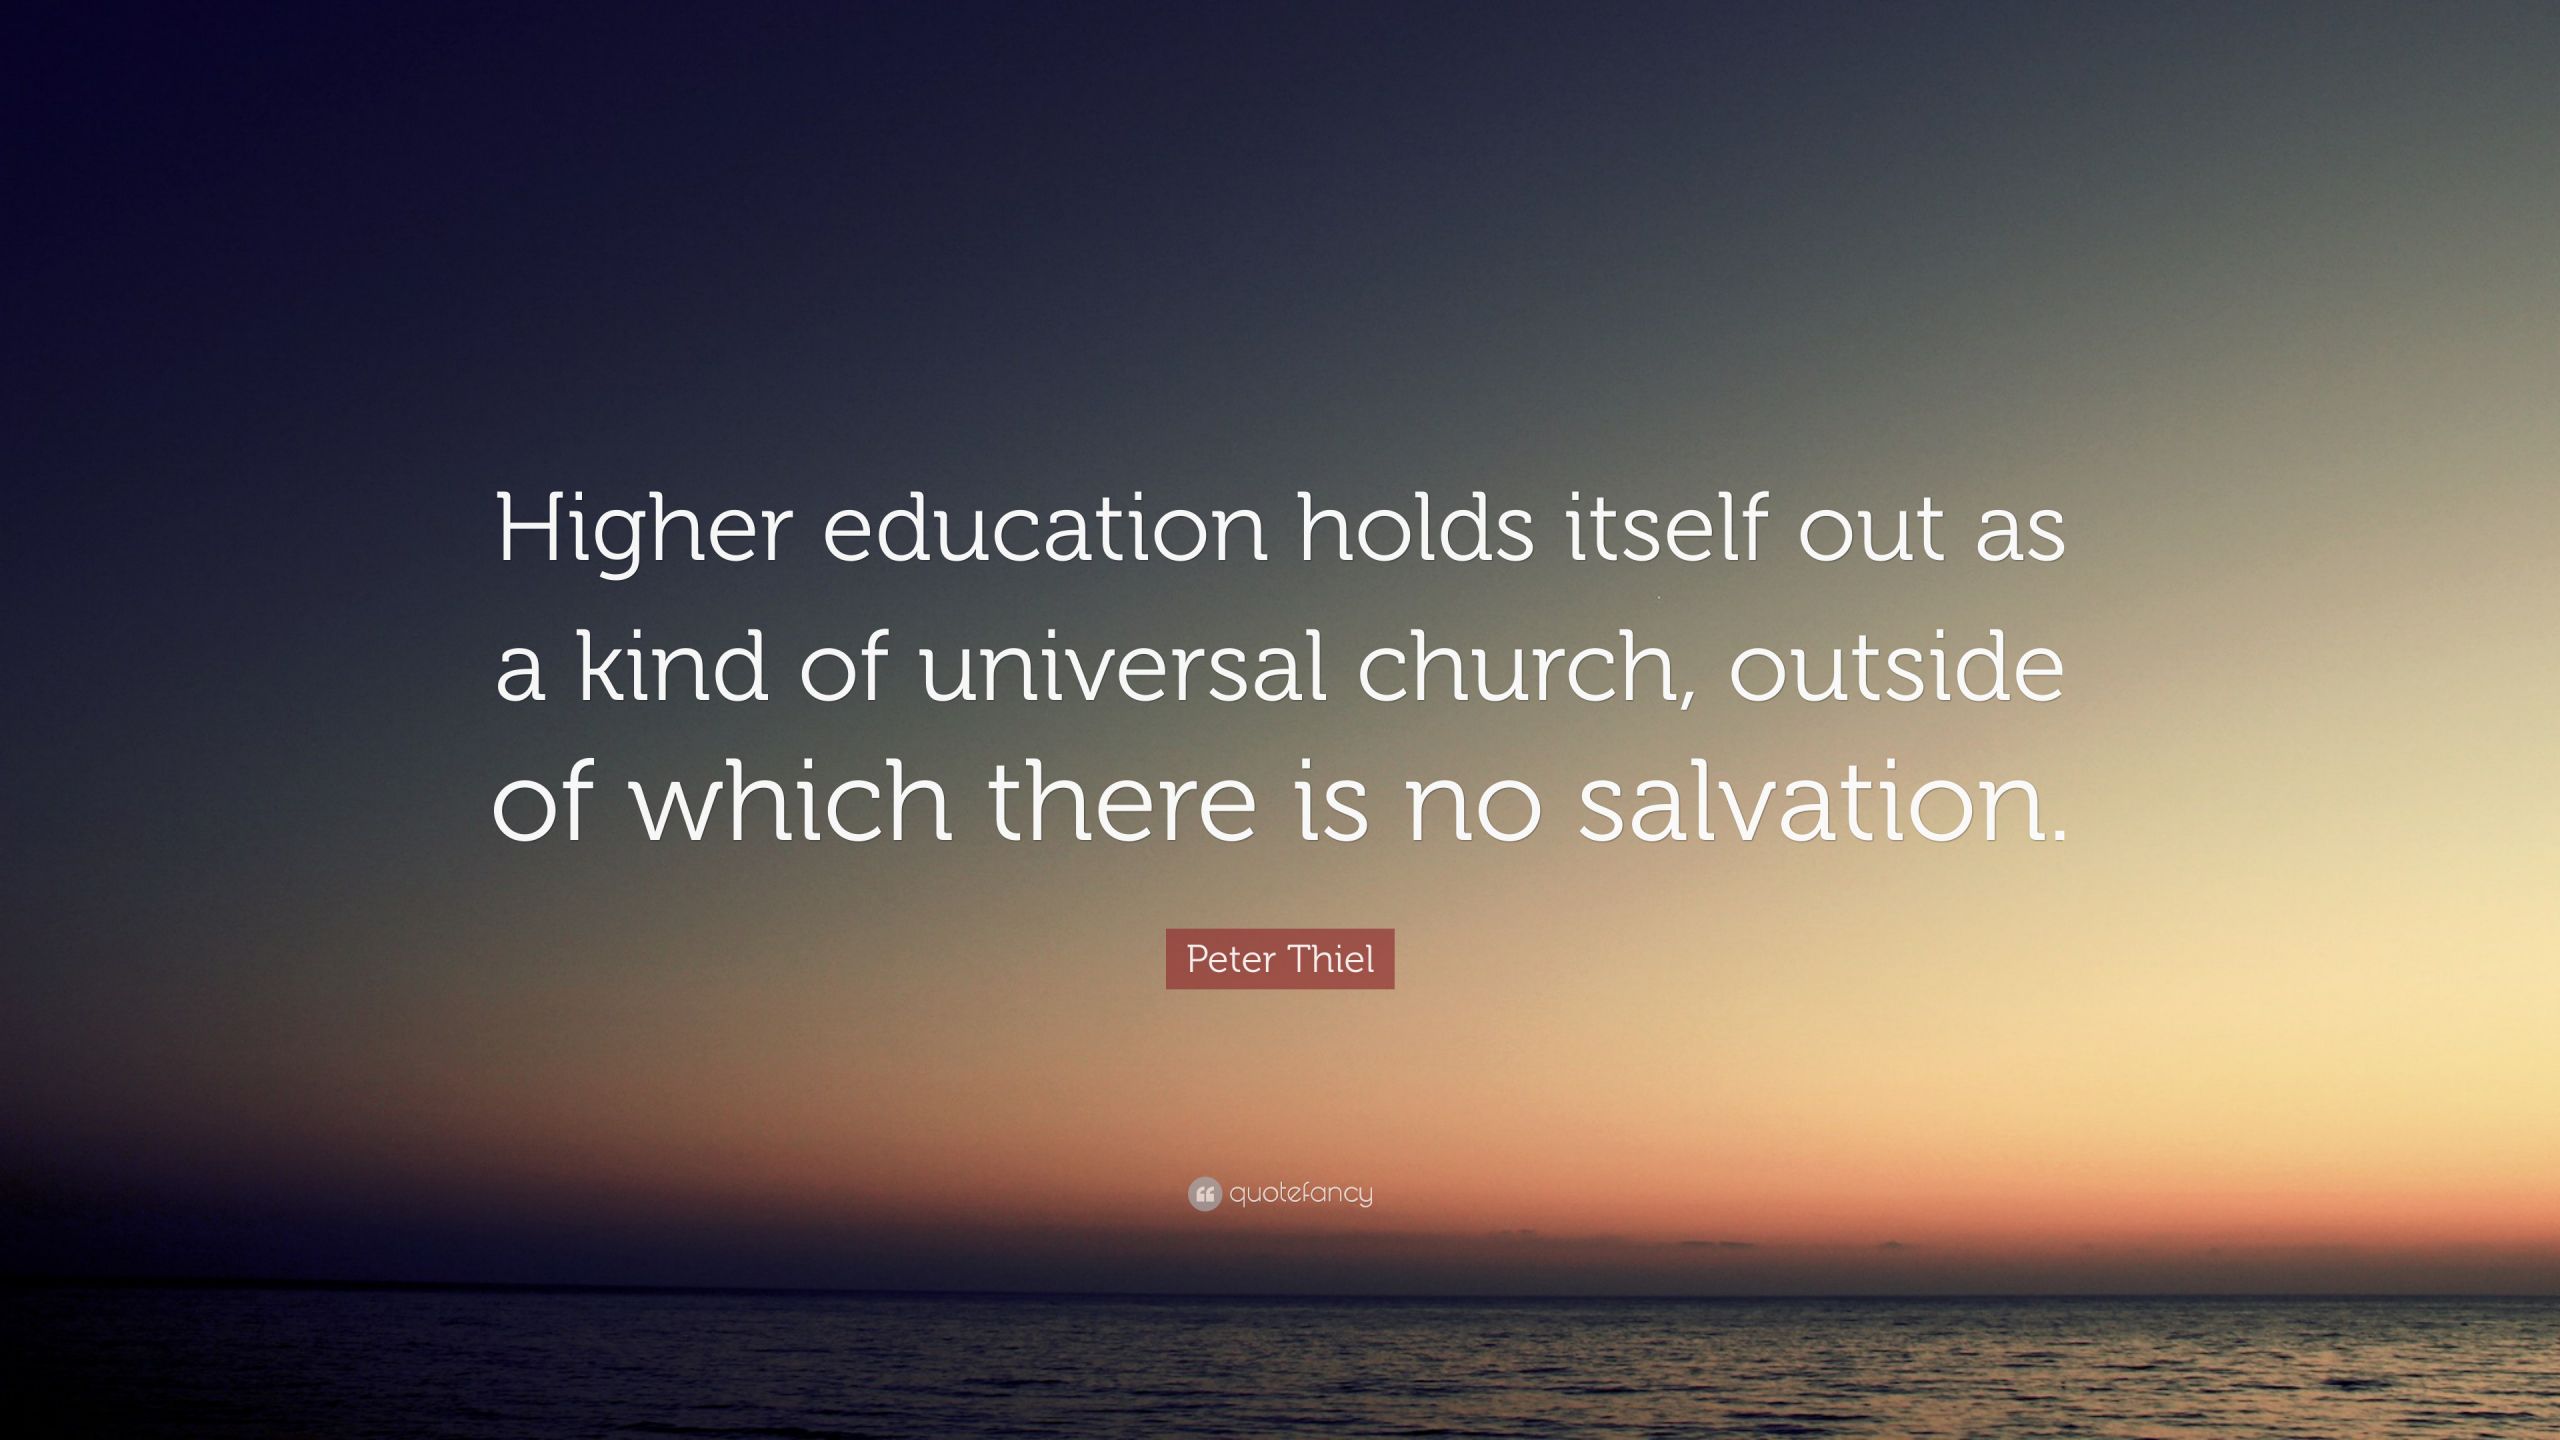 Higher Education Quotes
 Peter Thiel Quote “Higher education holds itself out as a